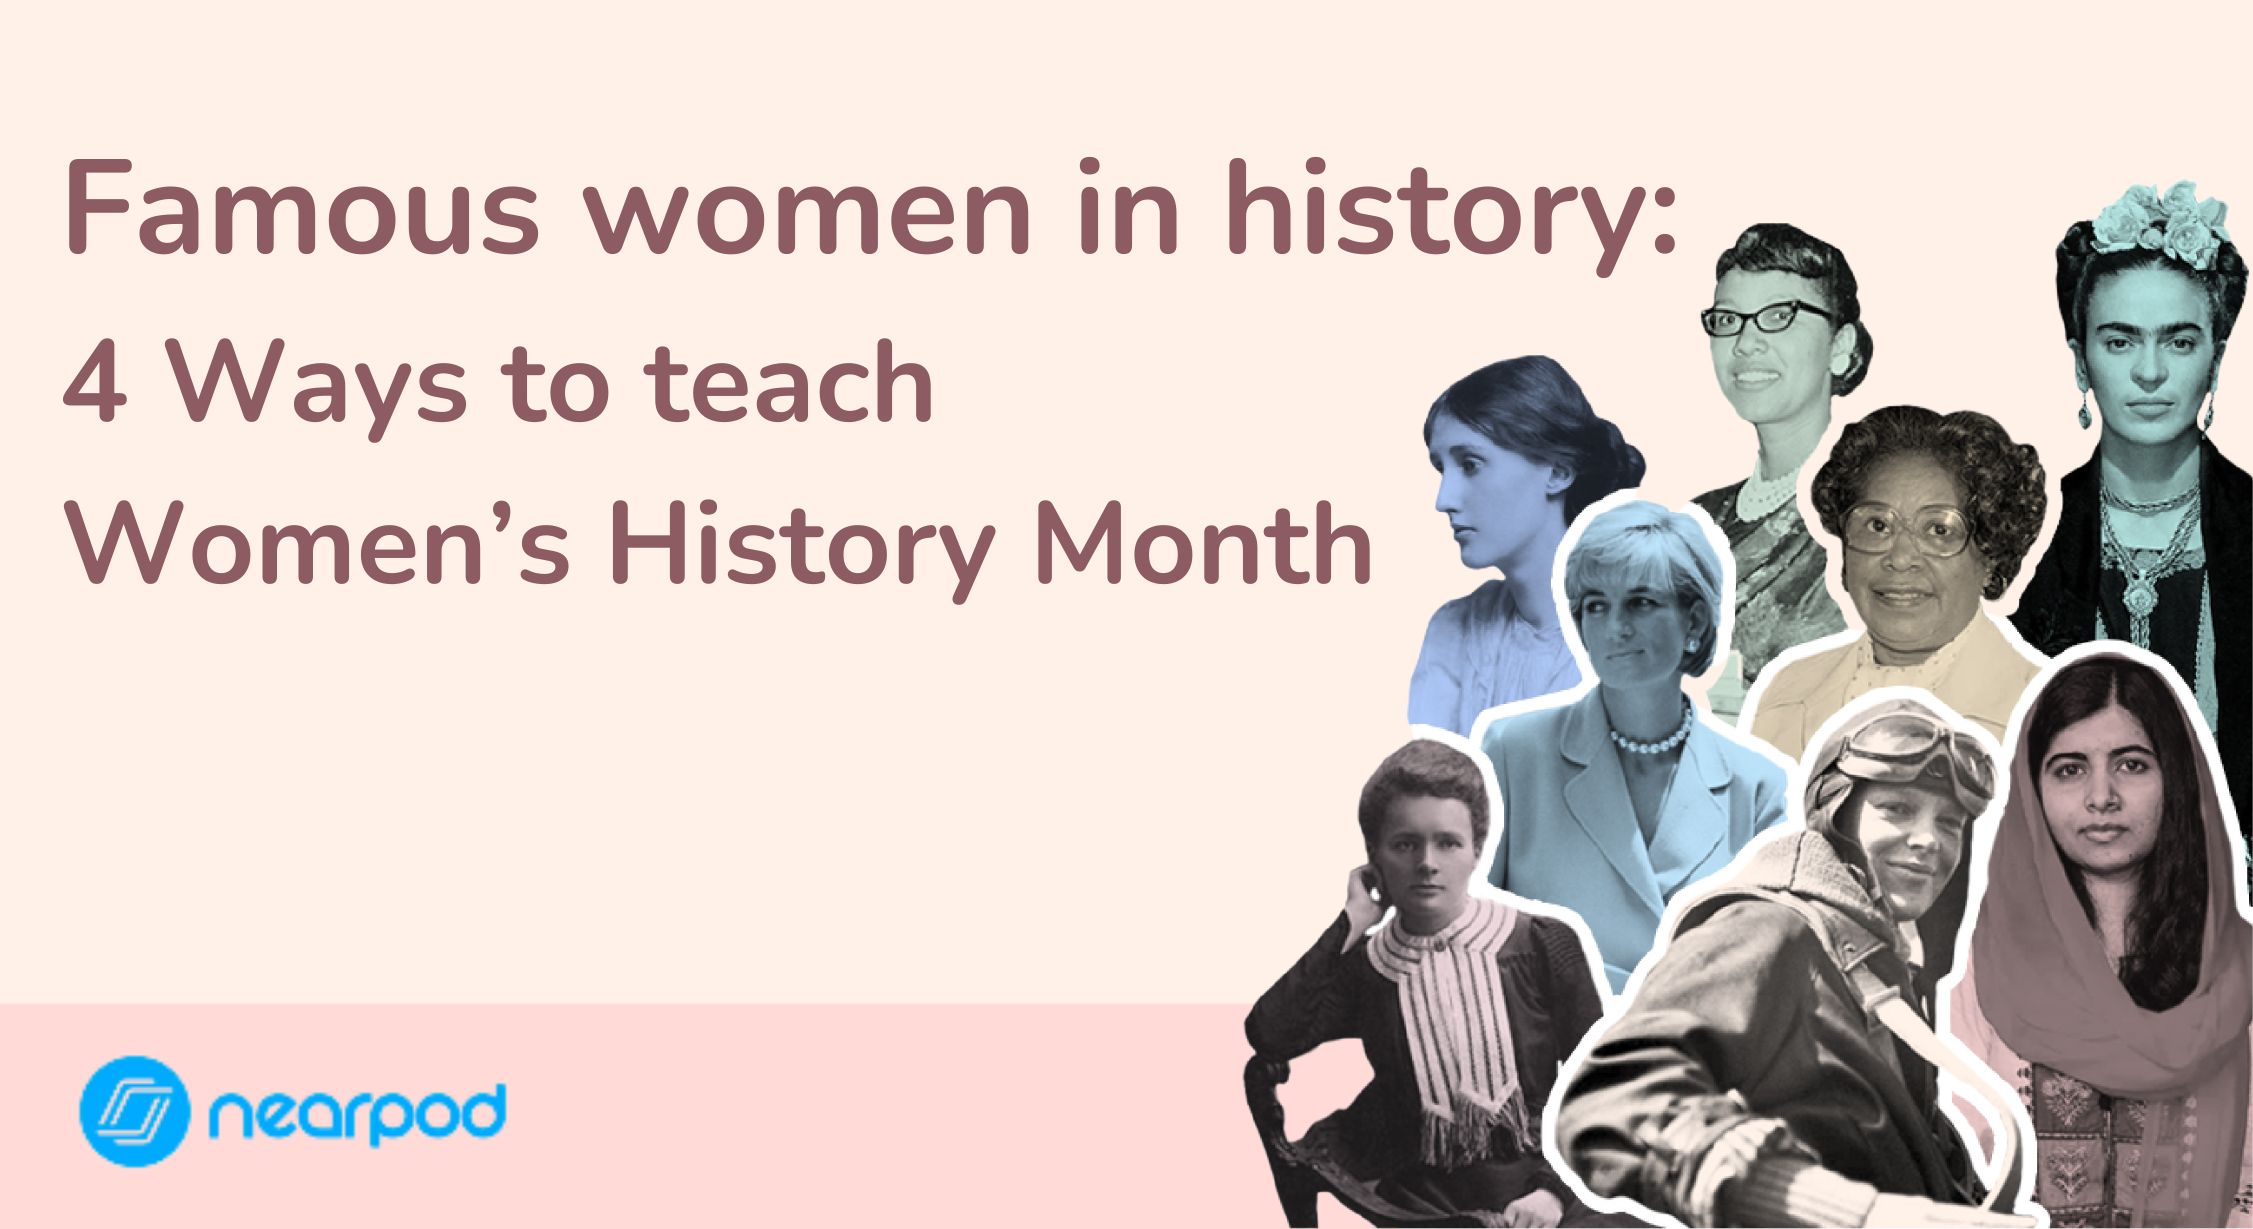 Famous women in history: 4 Ways to teach Women’s History Month